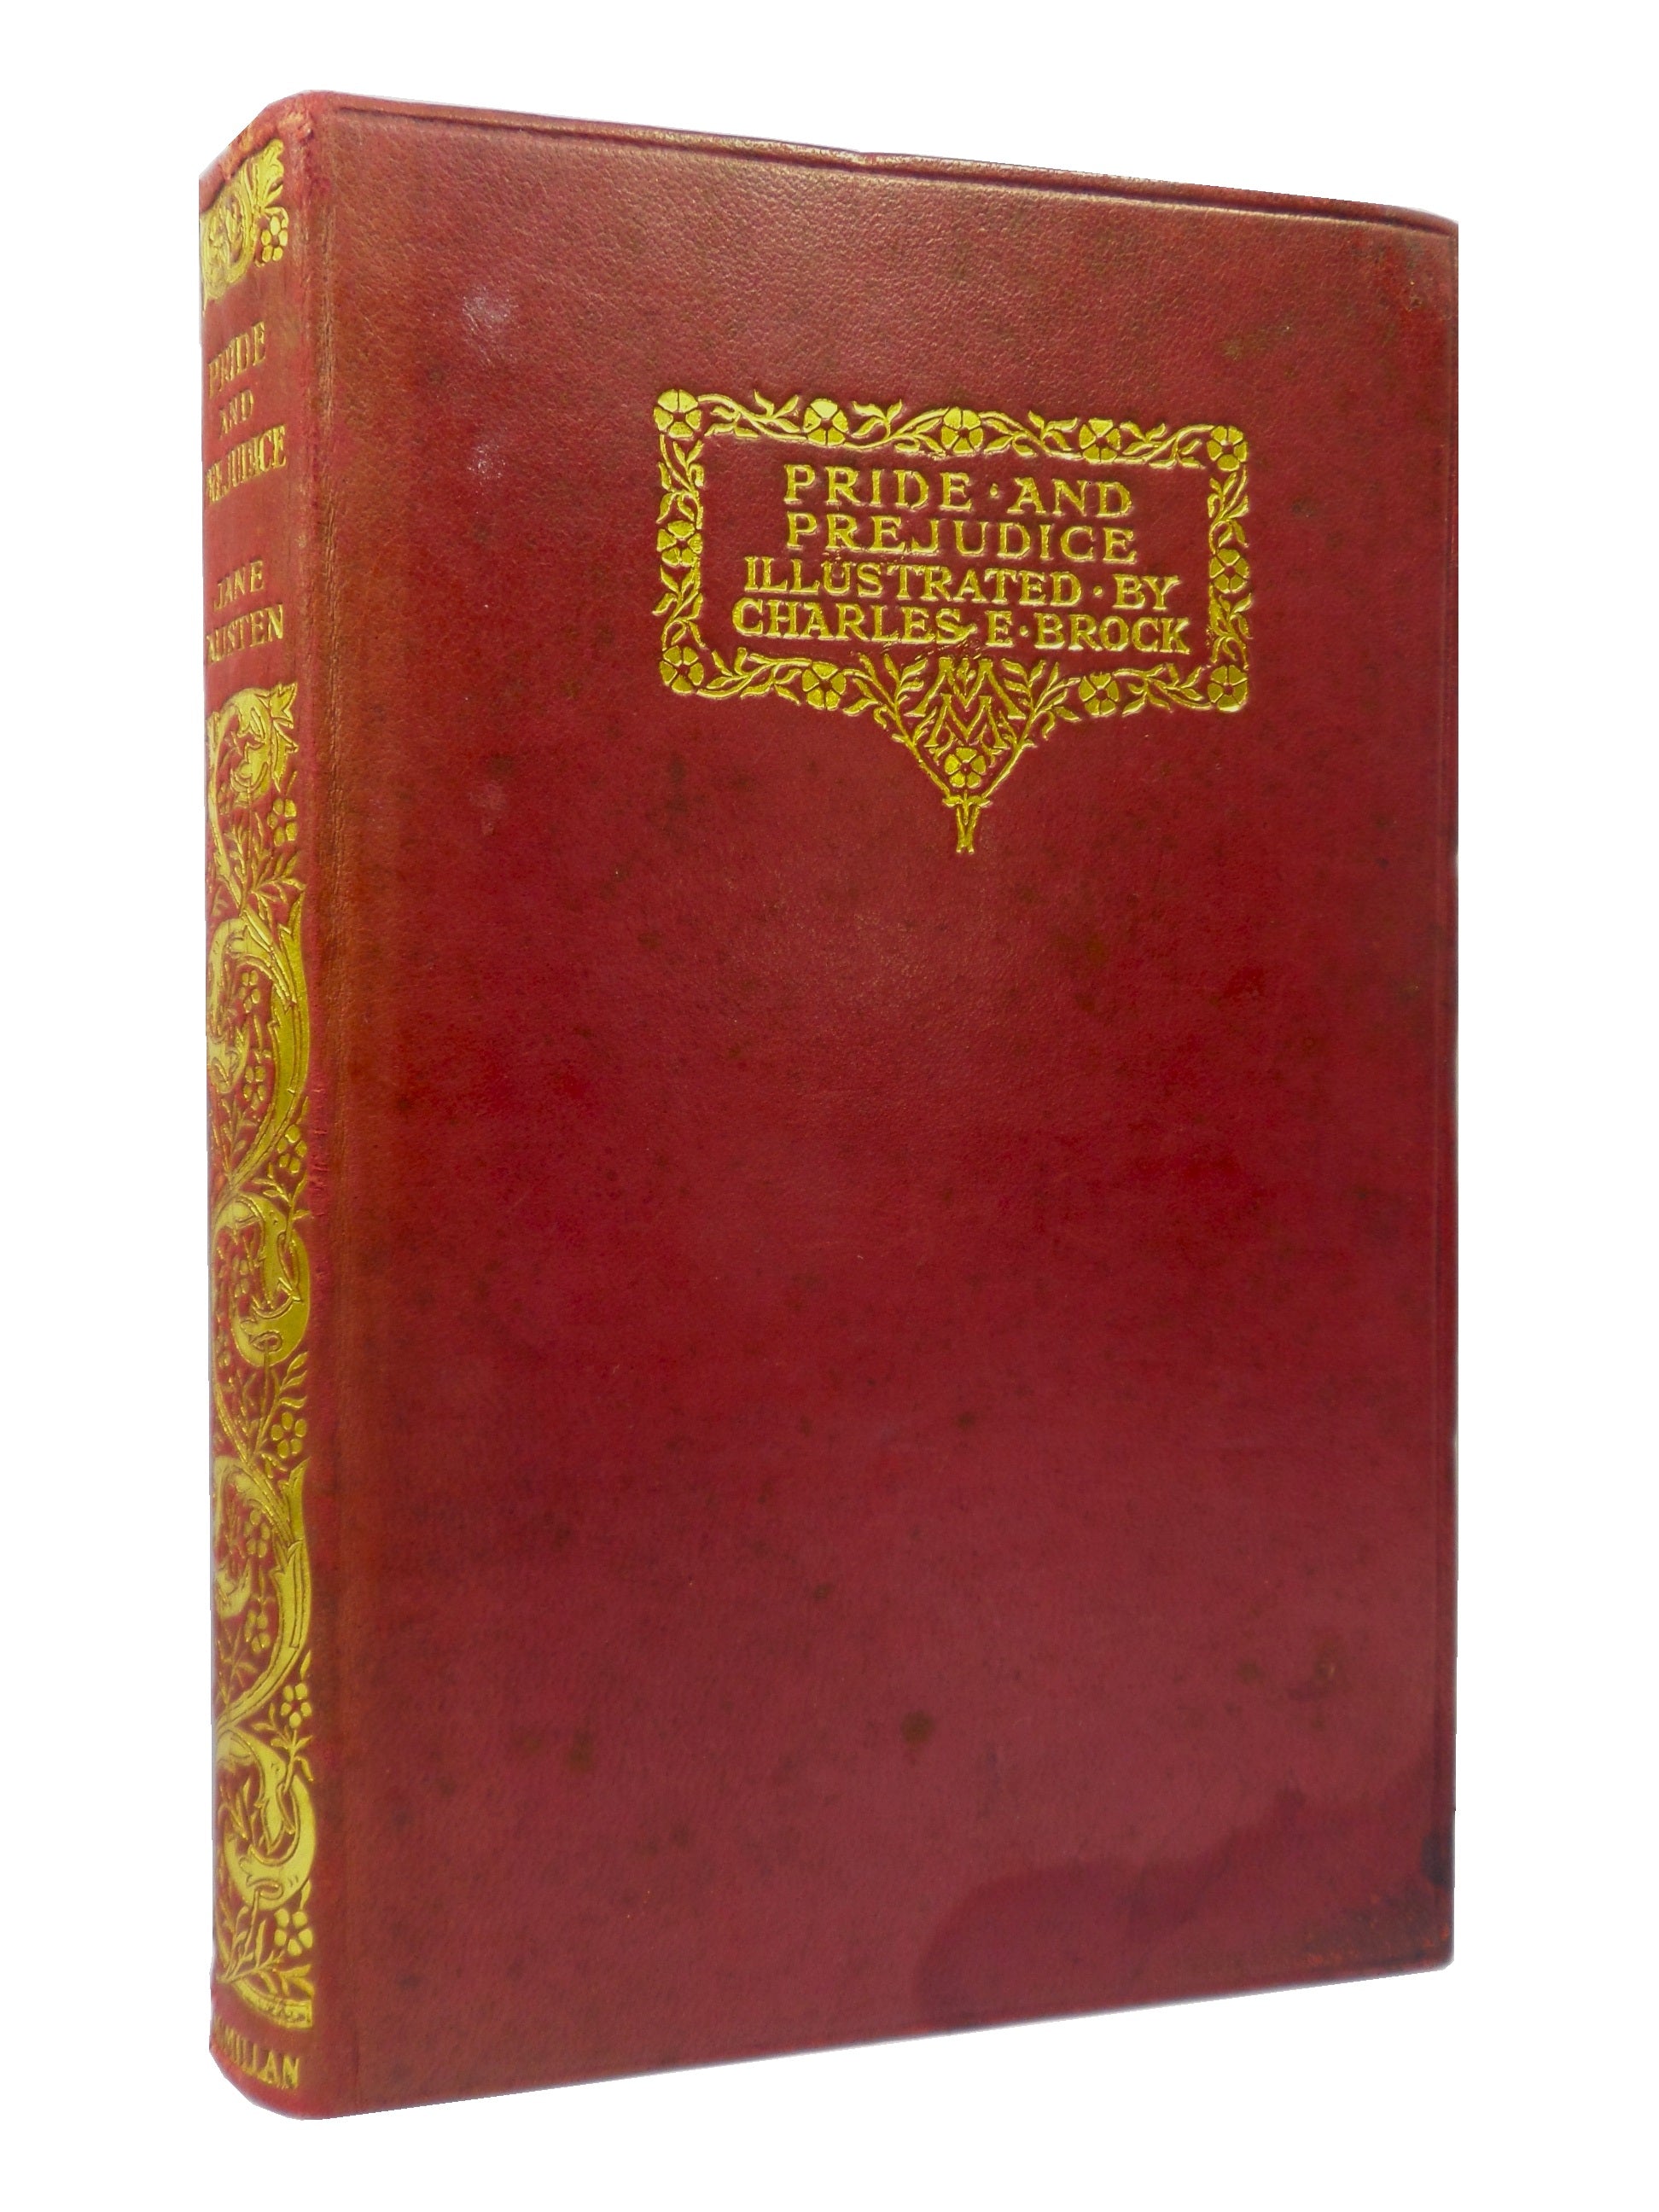 PRIDE AND PREJUDICE BY JANE AUSTEN 1917 CHARLES E. BROCK ILLS, LEATHER BINDING